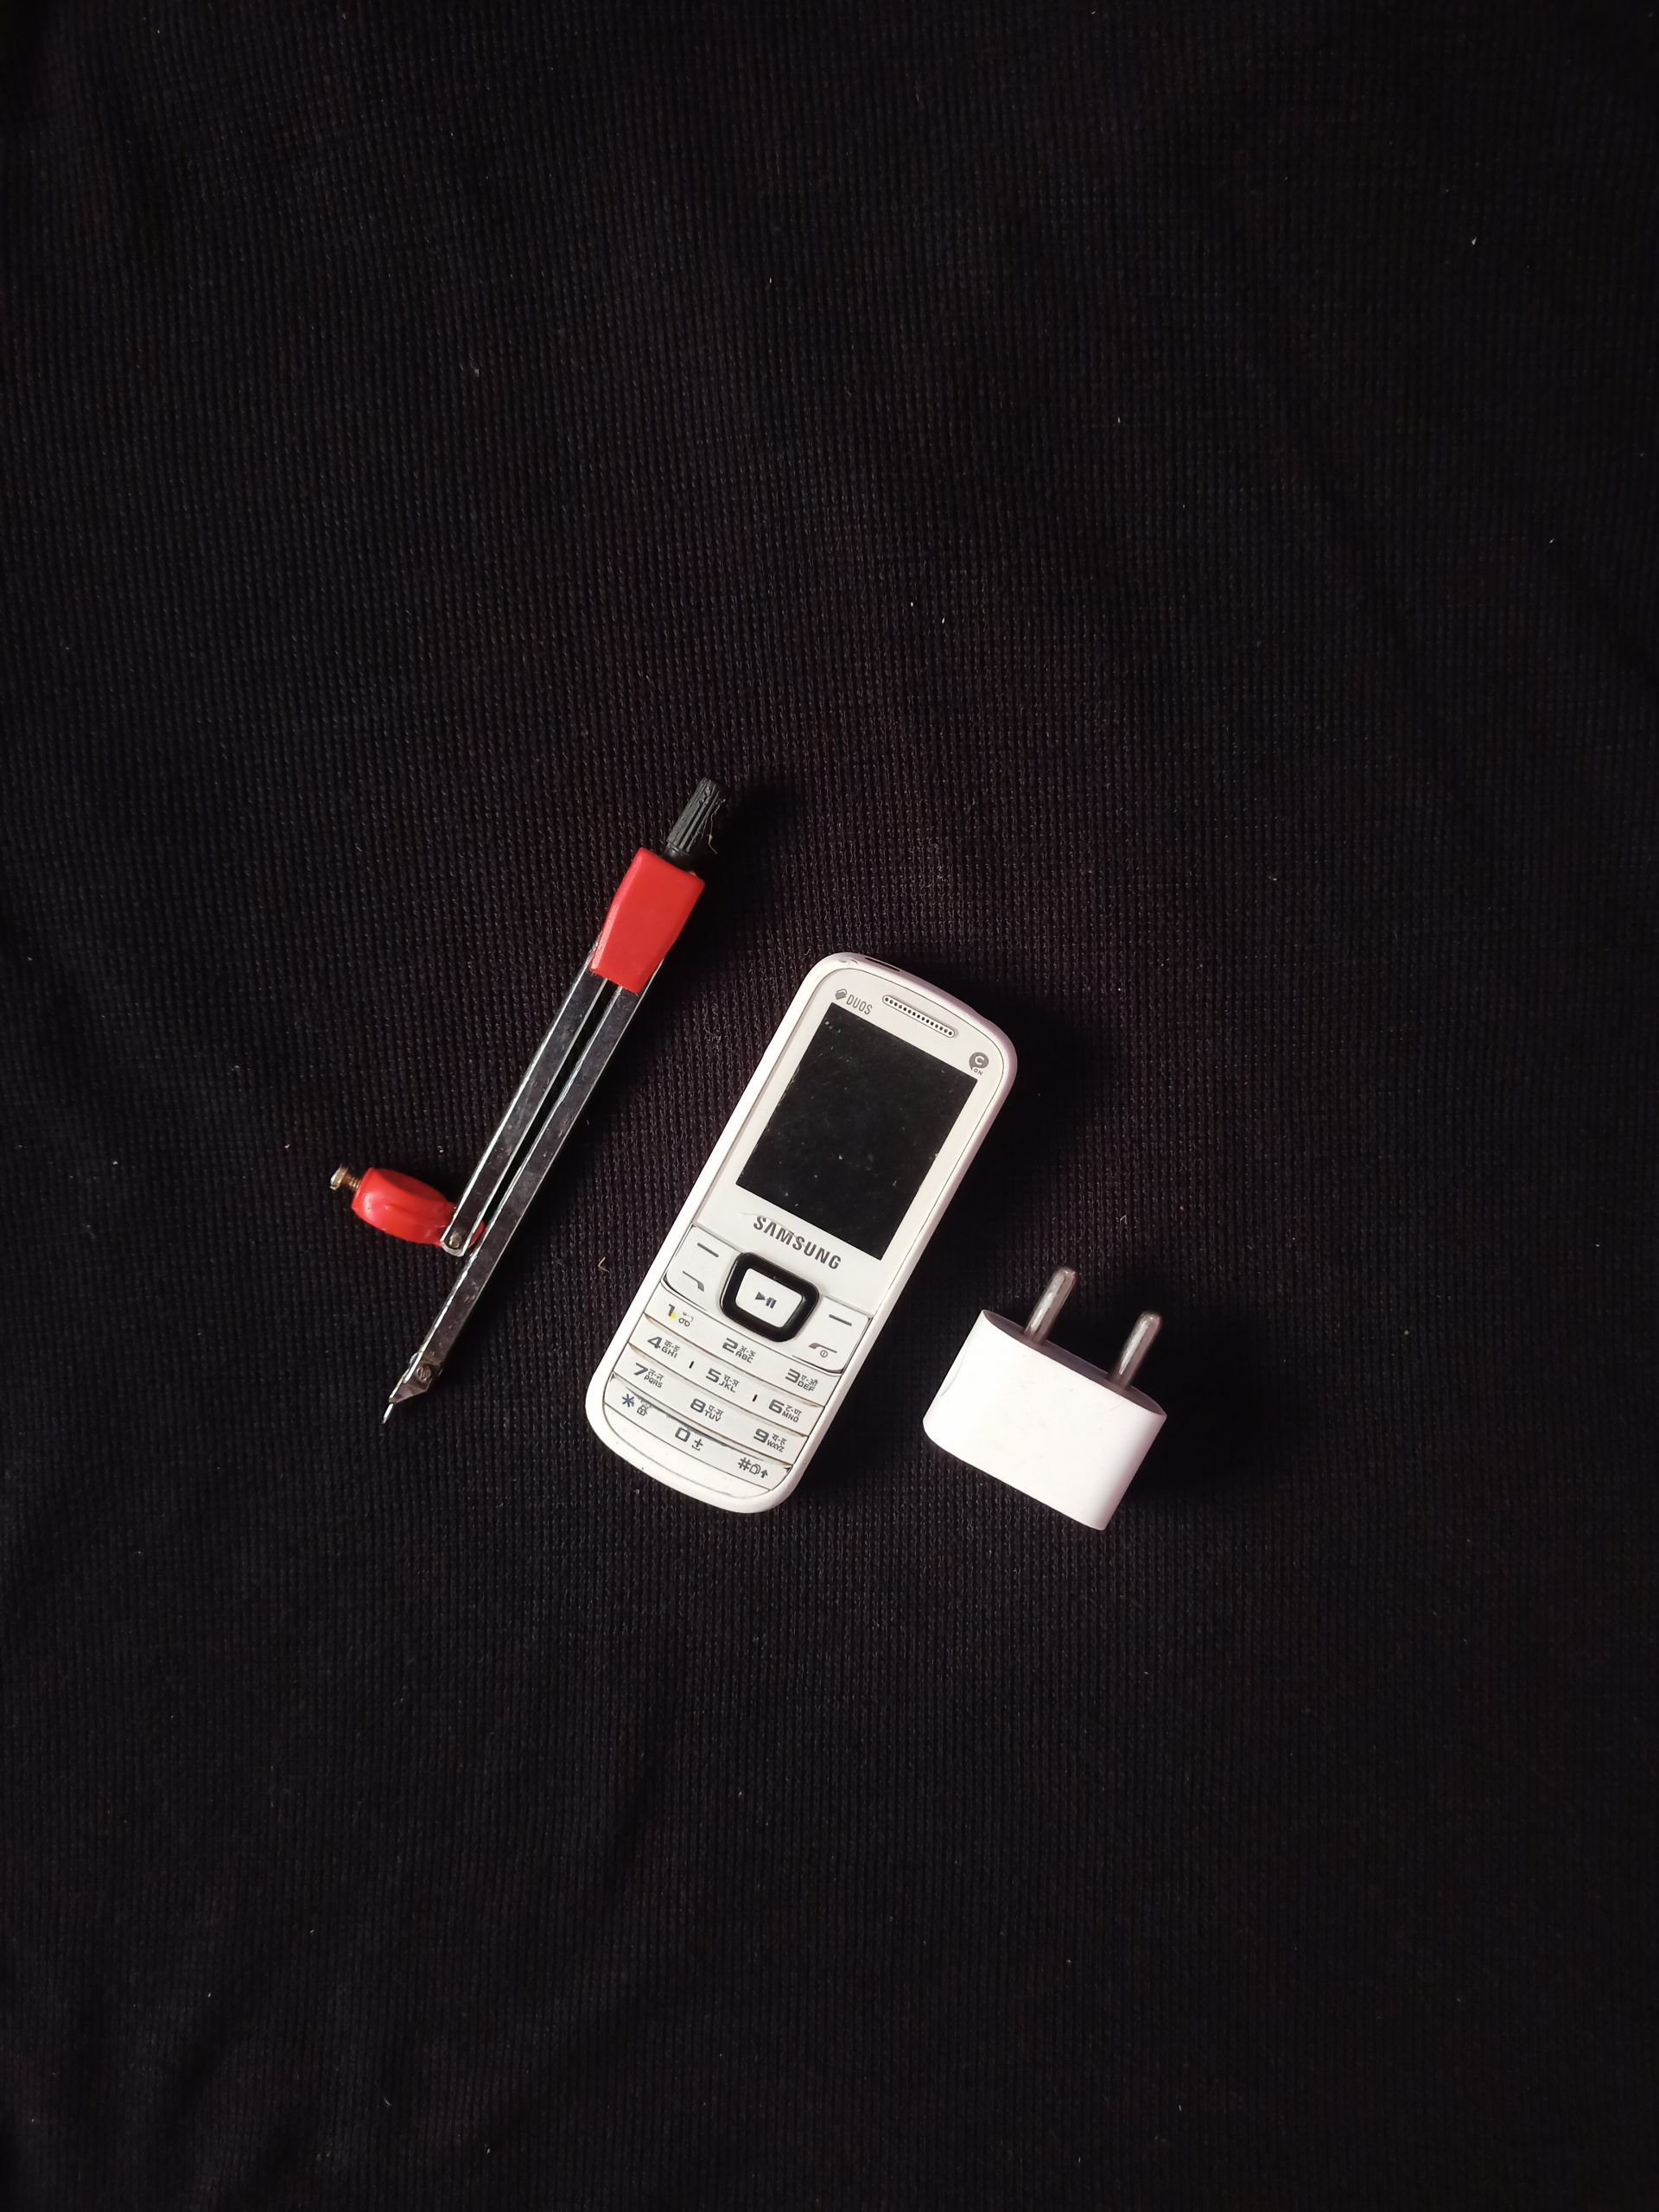 Phone, compass and charger